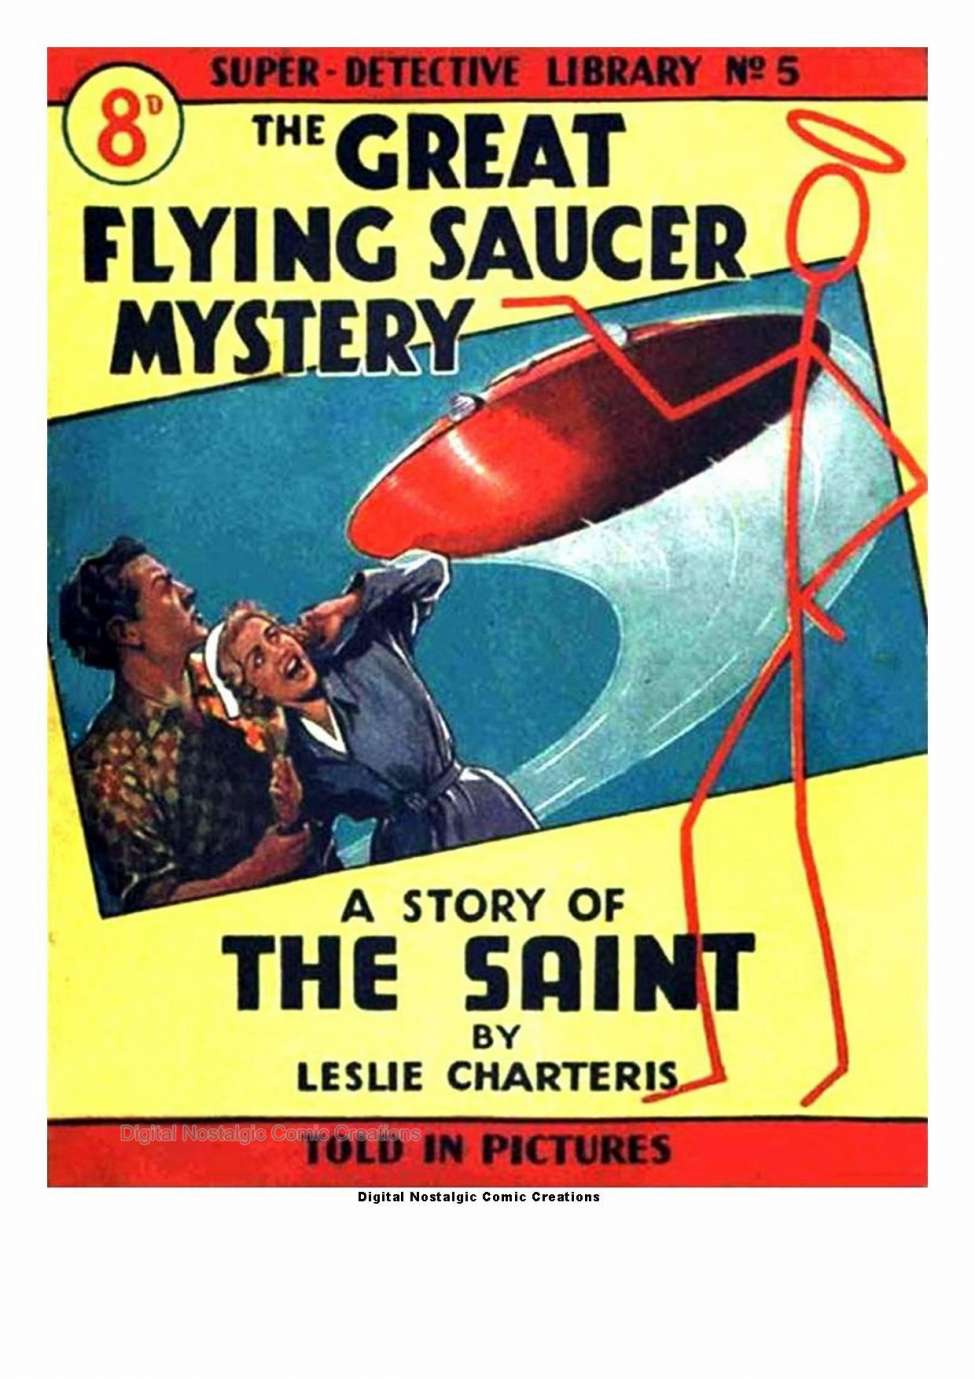 Book Cover For Super Detective Library 5 - The Great Flying Saucer Mystery